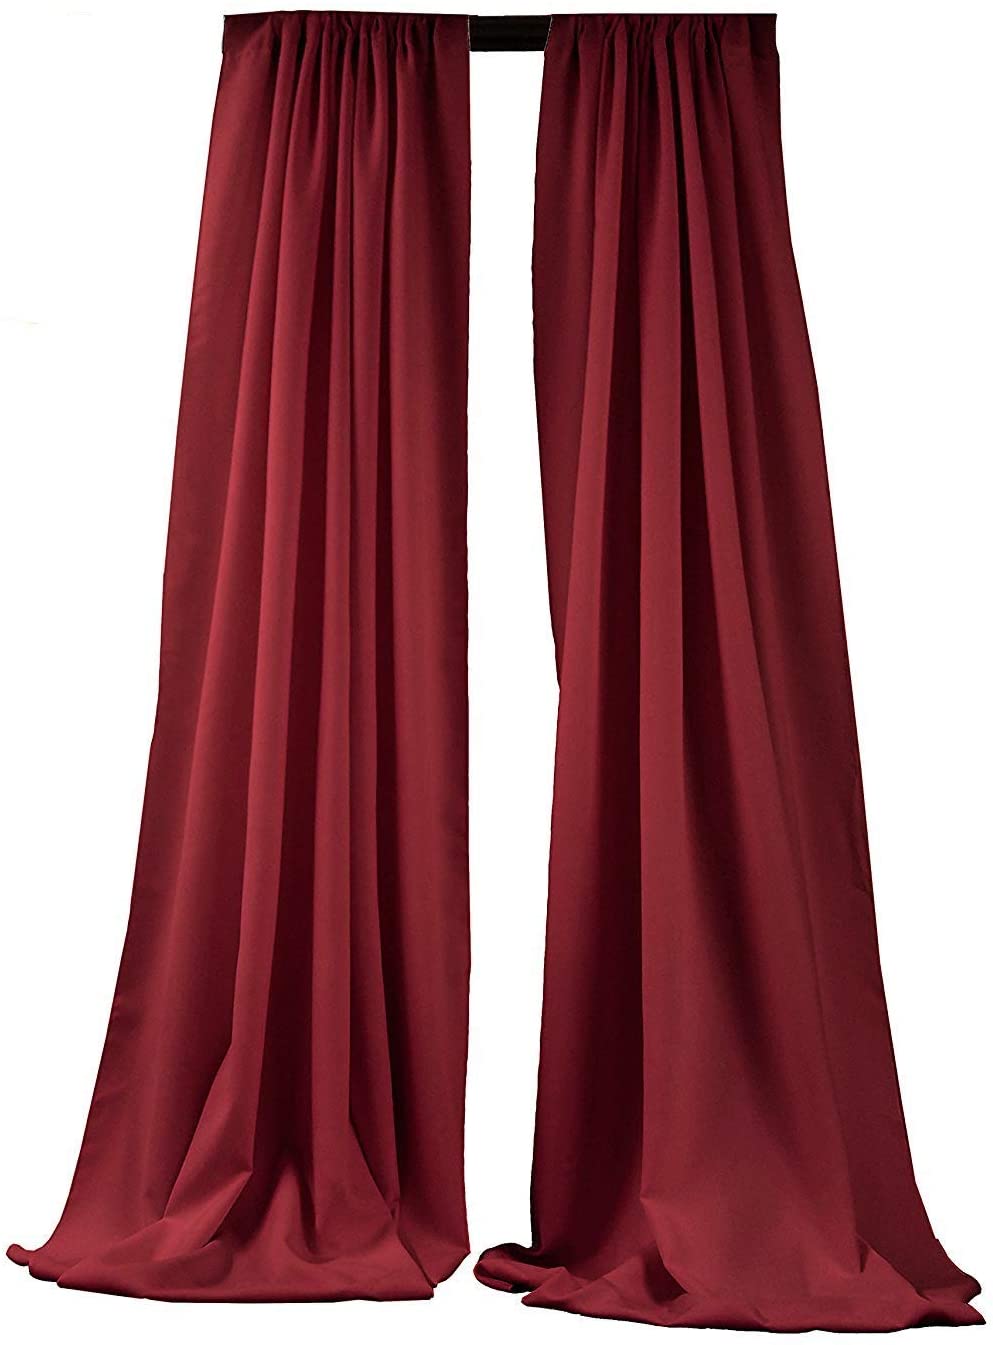 2 Panels 5 Feet Wide Polyester Seamless Backdrop Drape Curtain Panel - (Cranberry,